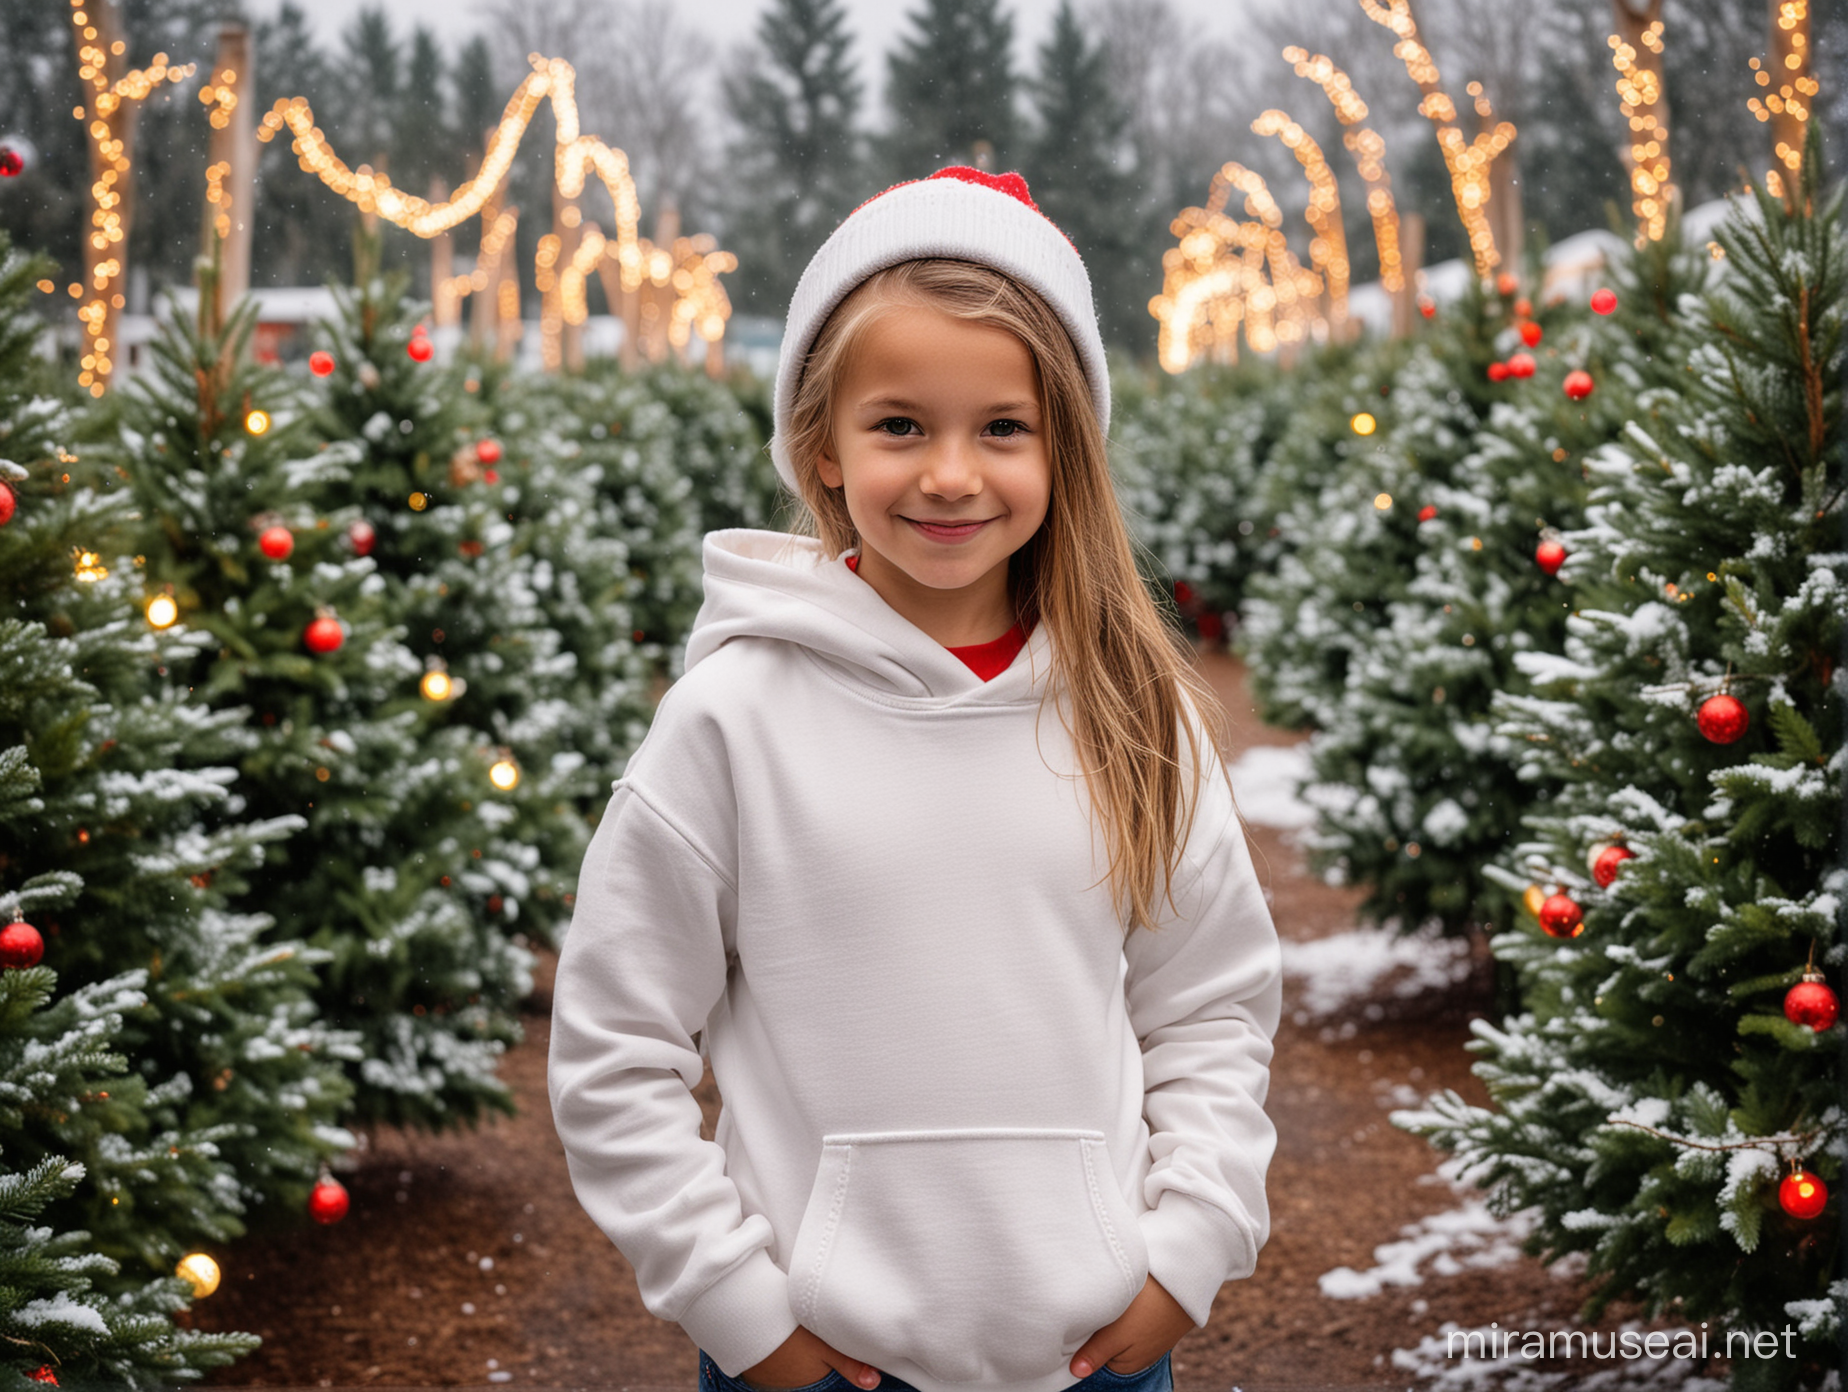 Adorable Girl in White Hoodie and Red Beanie at Snowy Christmas Tree Farm